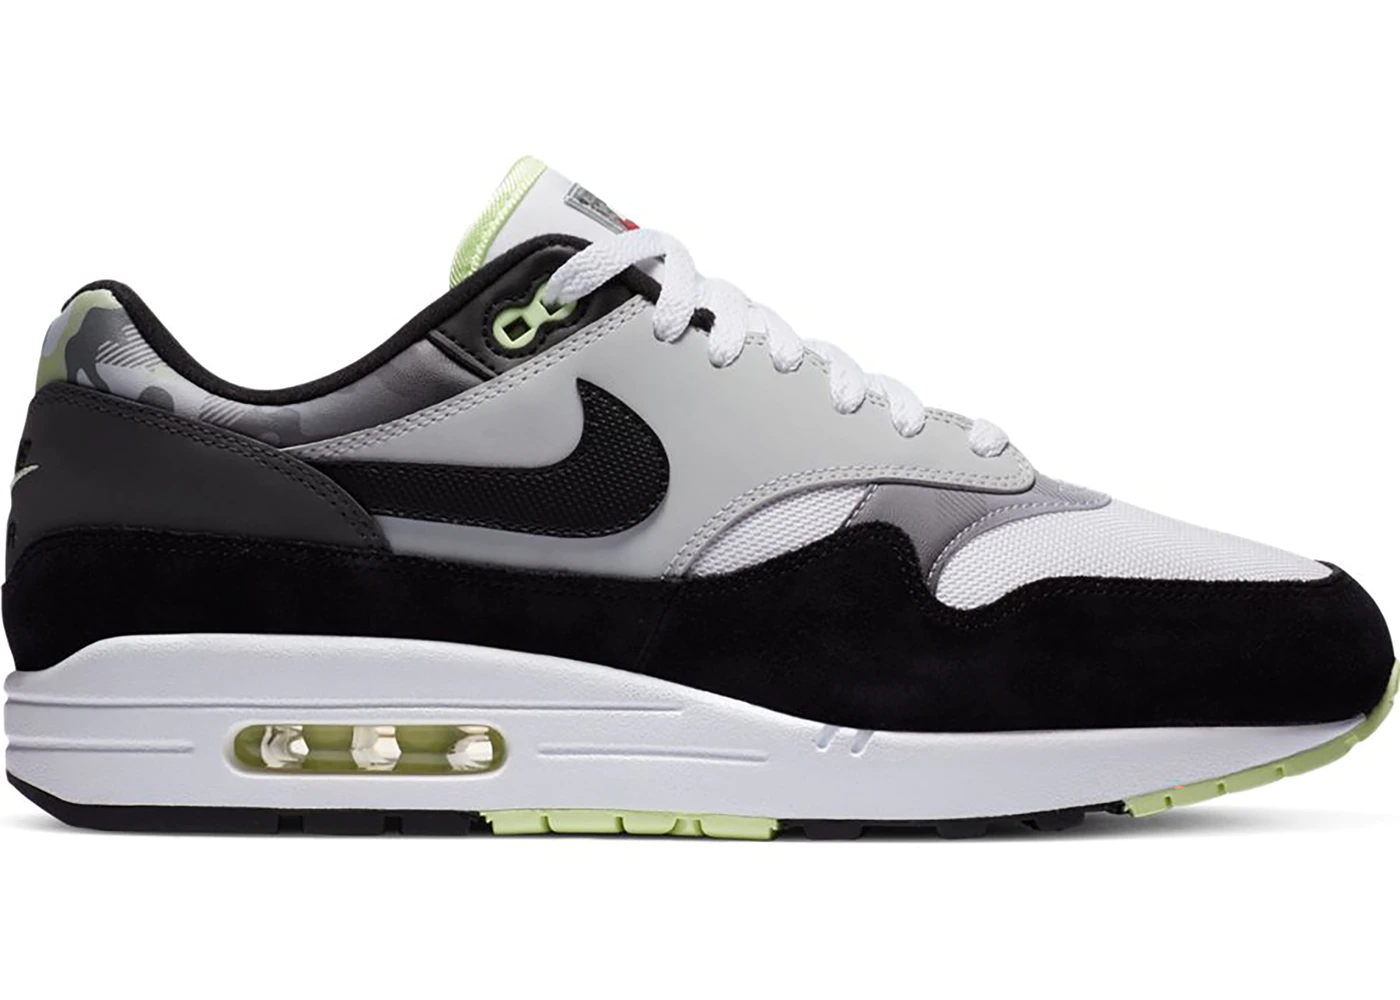 Now Available: Nike Air Max 1 